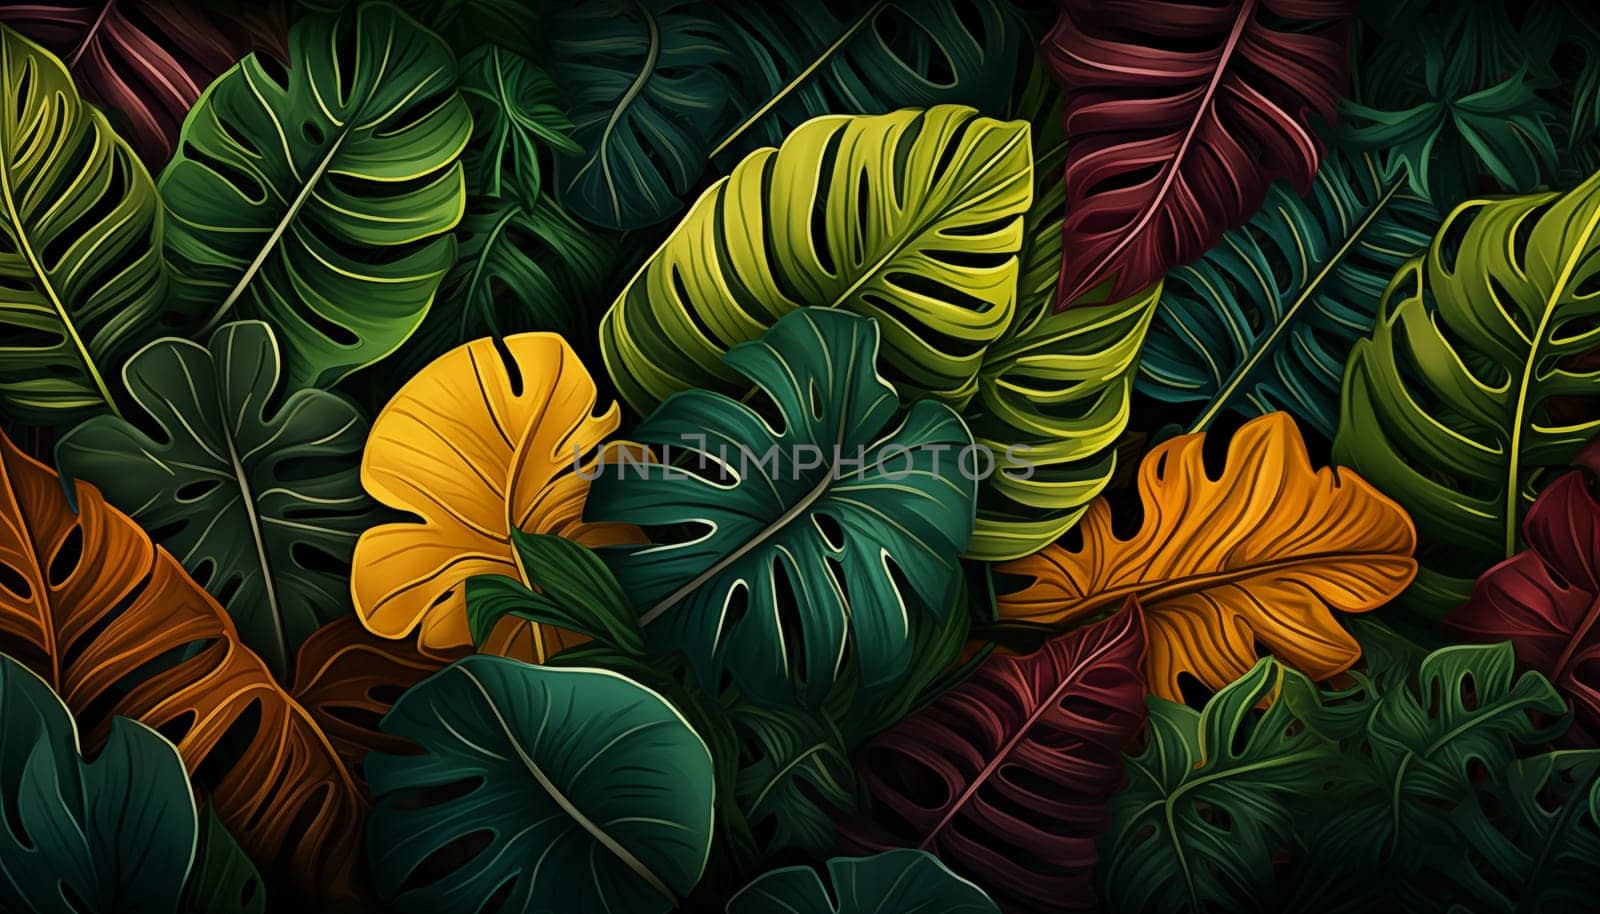 Jungle leaves background. High quality photo